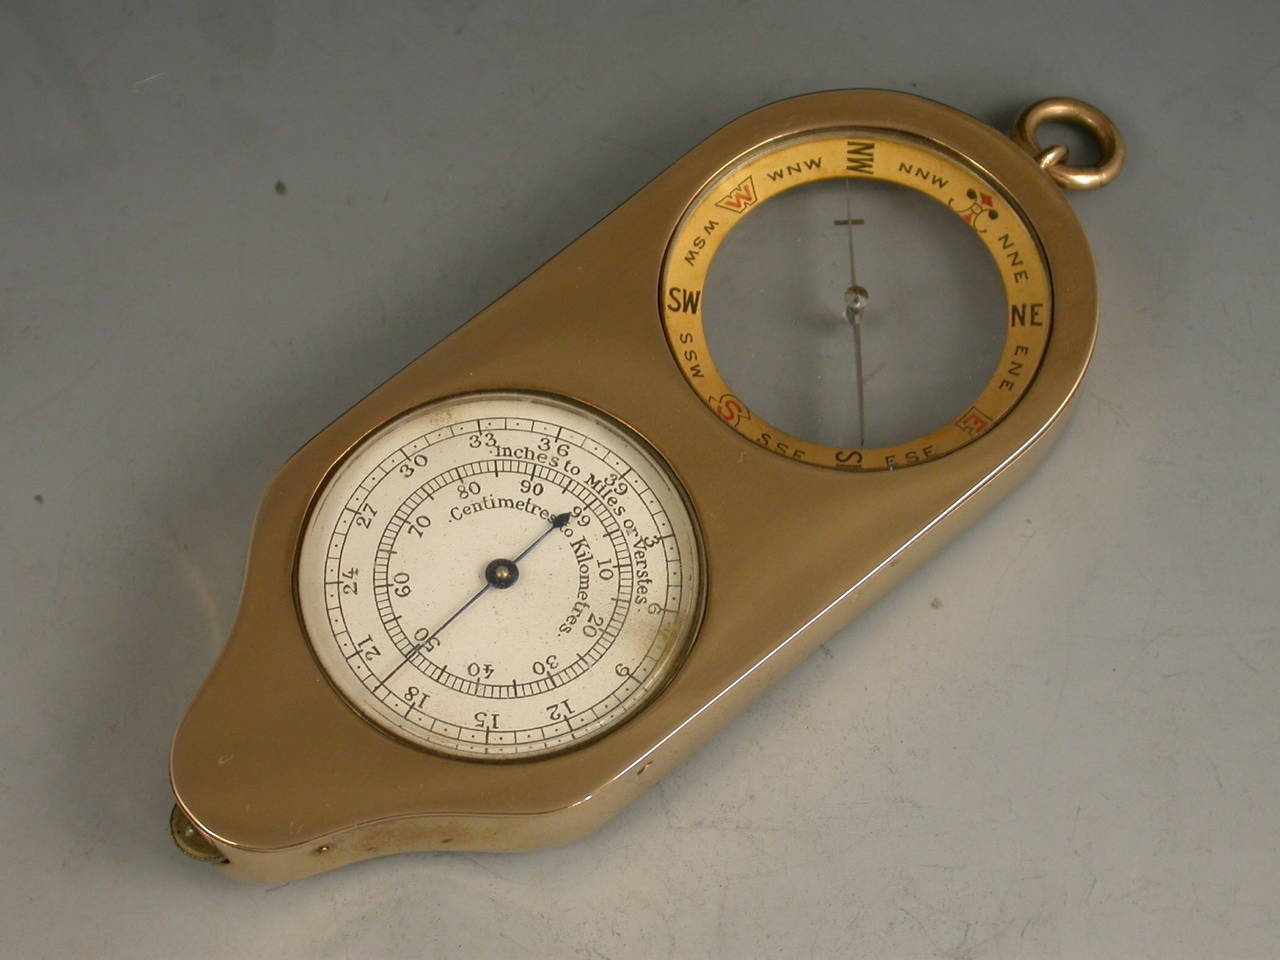 20th Century Edwardian Cased Nine-Karat Gold Opisometer or Compass or Map Measuring Tool